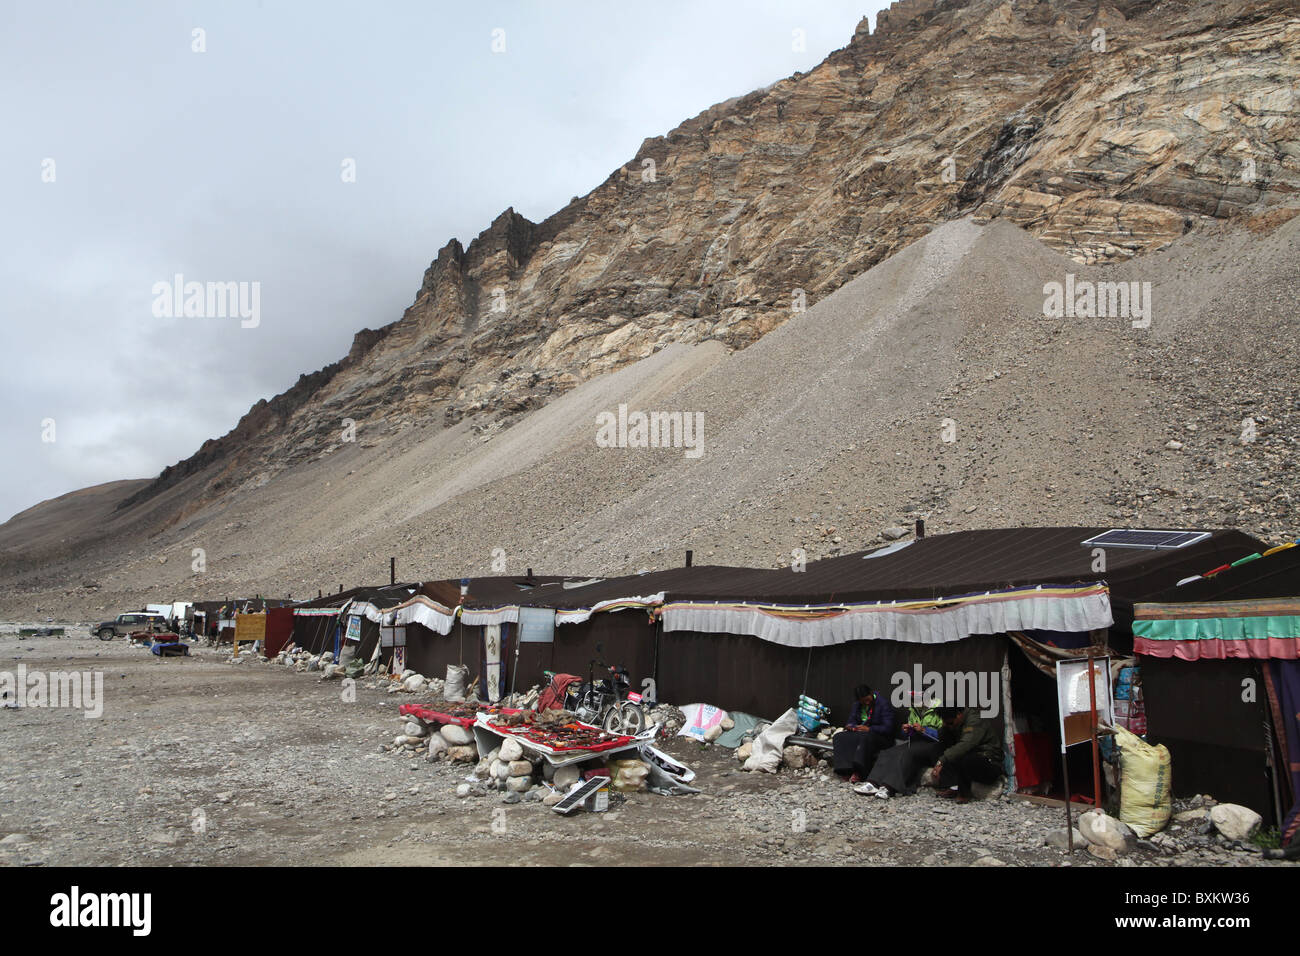 Tent camps or hotels set up for tourists at Everest base camp in Tibet, China. Stock Photo